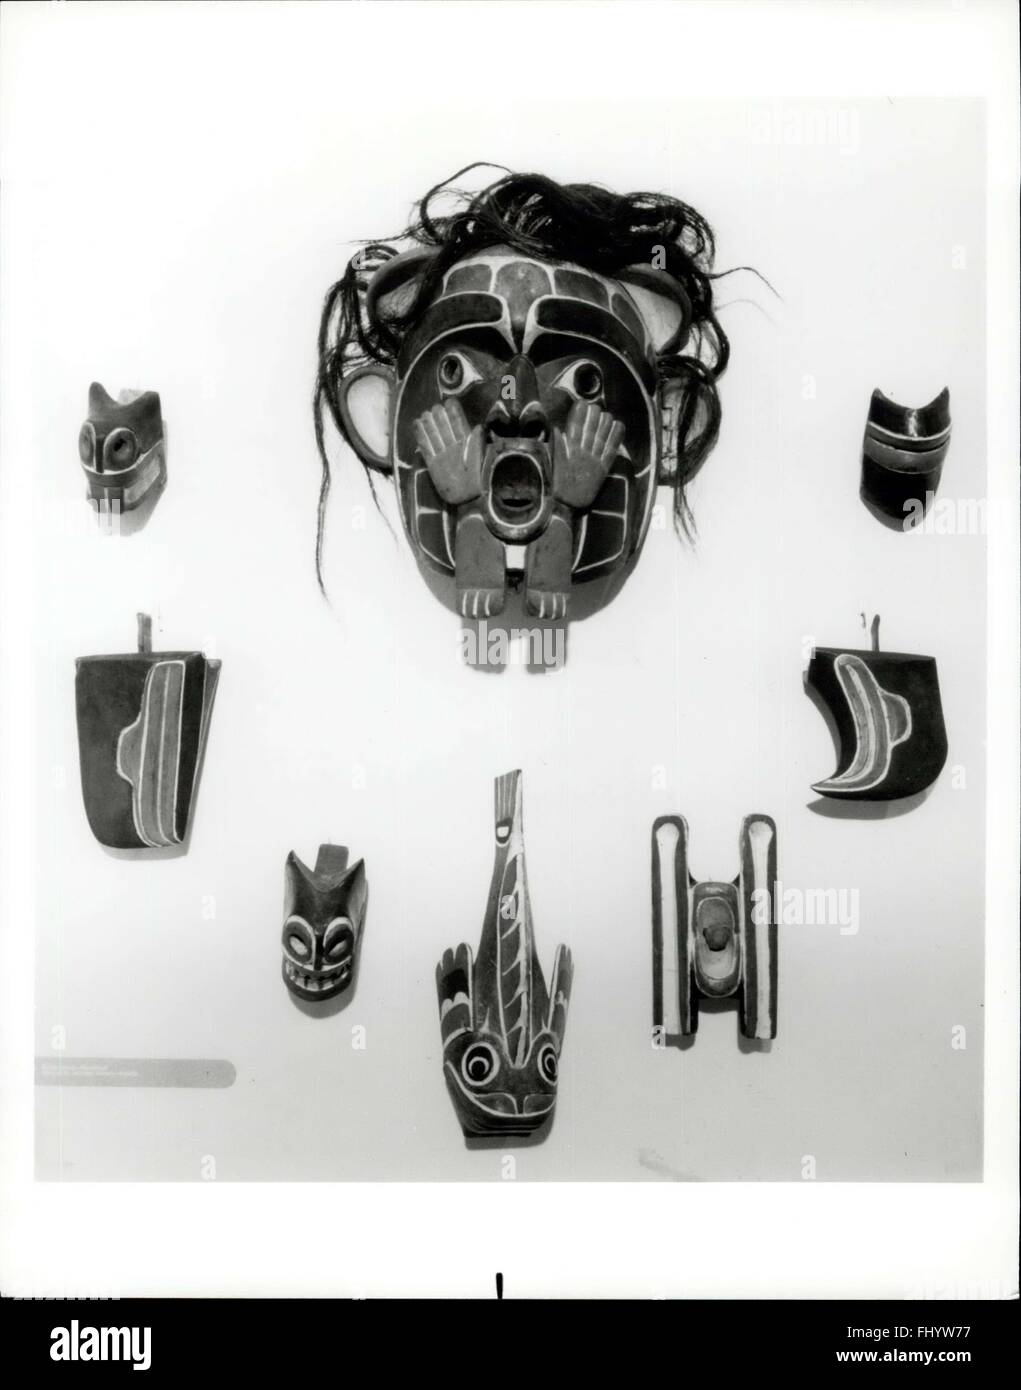 1971 - Art Of The First Americans: Story-telling mask necessitates sleight-of-hand to manipulate interchangeable mouths for various roles: raven fish, eagle, man and some mythical characters. Main mouth is Echo. Objects compose a family ''create, '' Illustrating an ancestral legend, which potlatch host hired a dancer to enact. © Keystone Pictures USA/ZUMAPRESS.com/Alamy Live News Stock Photo